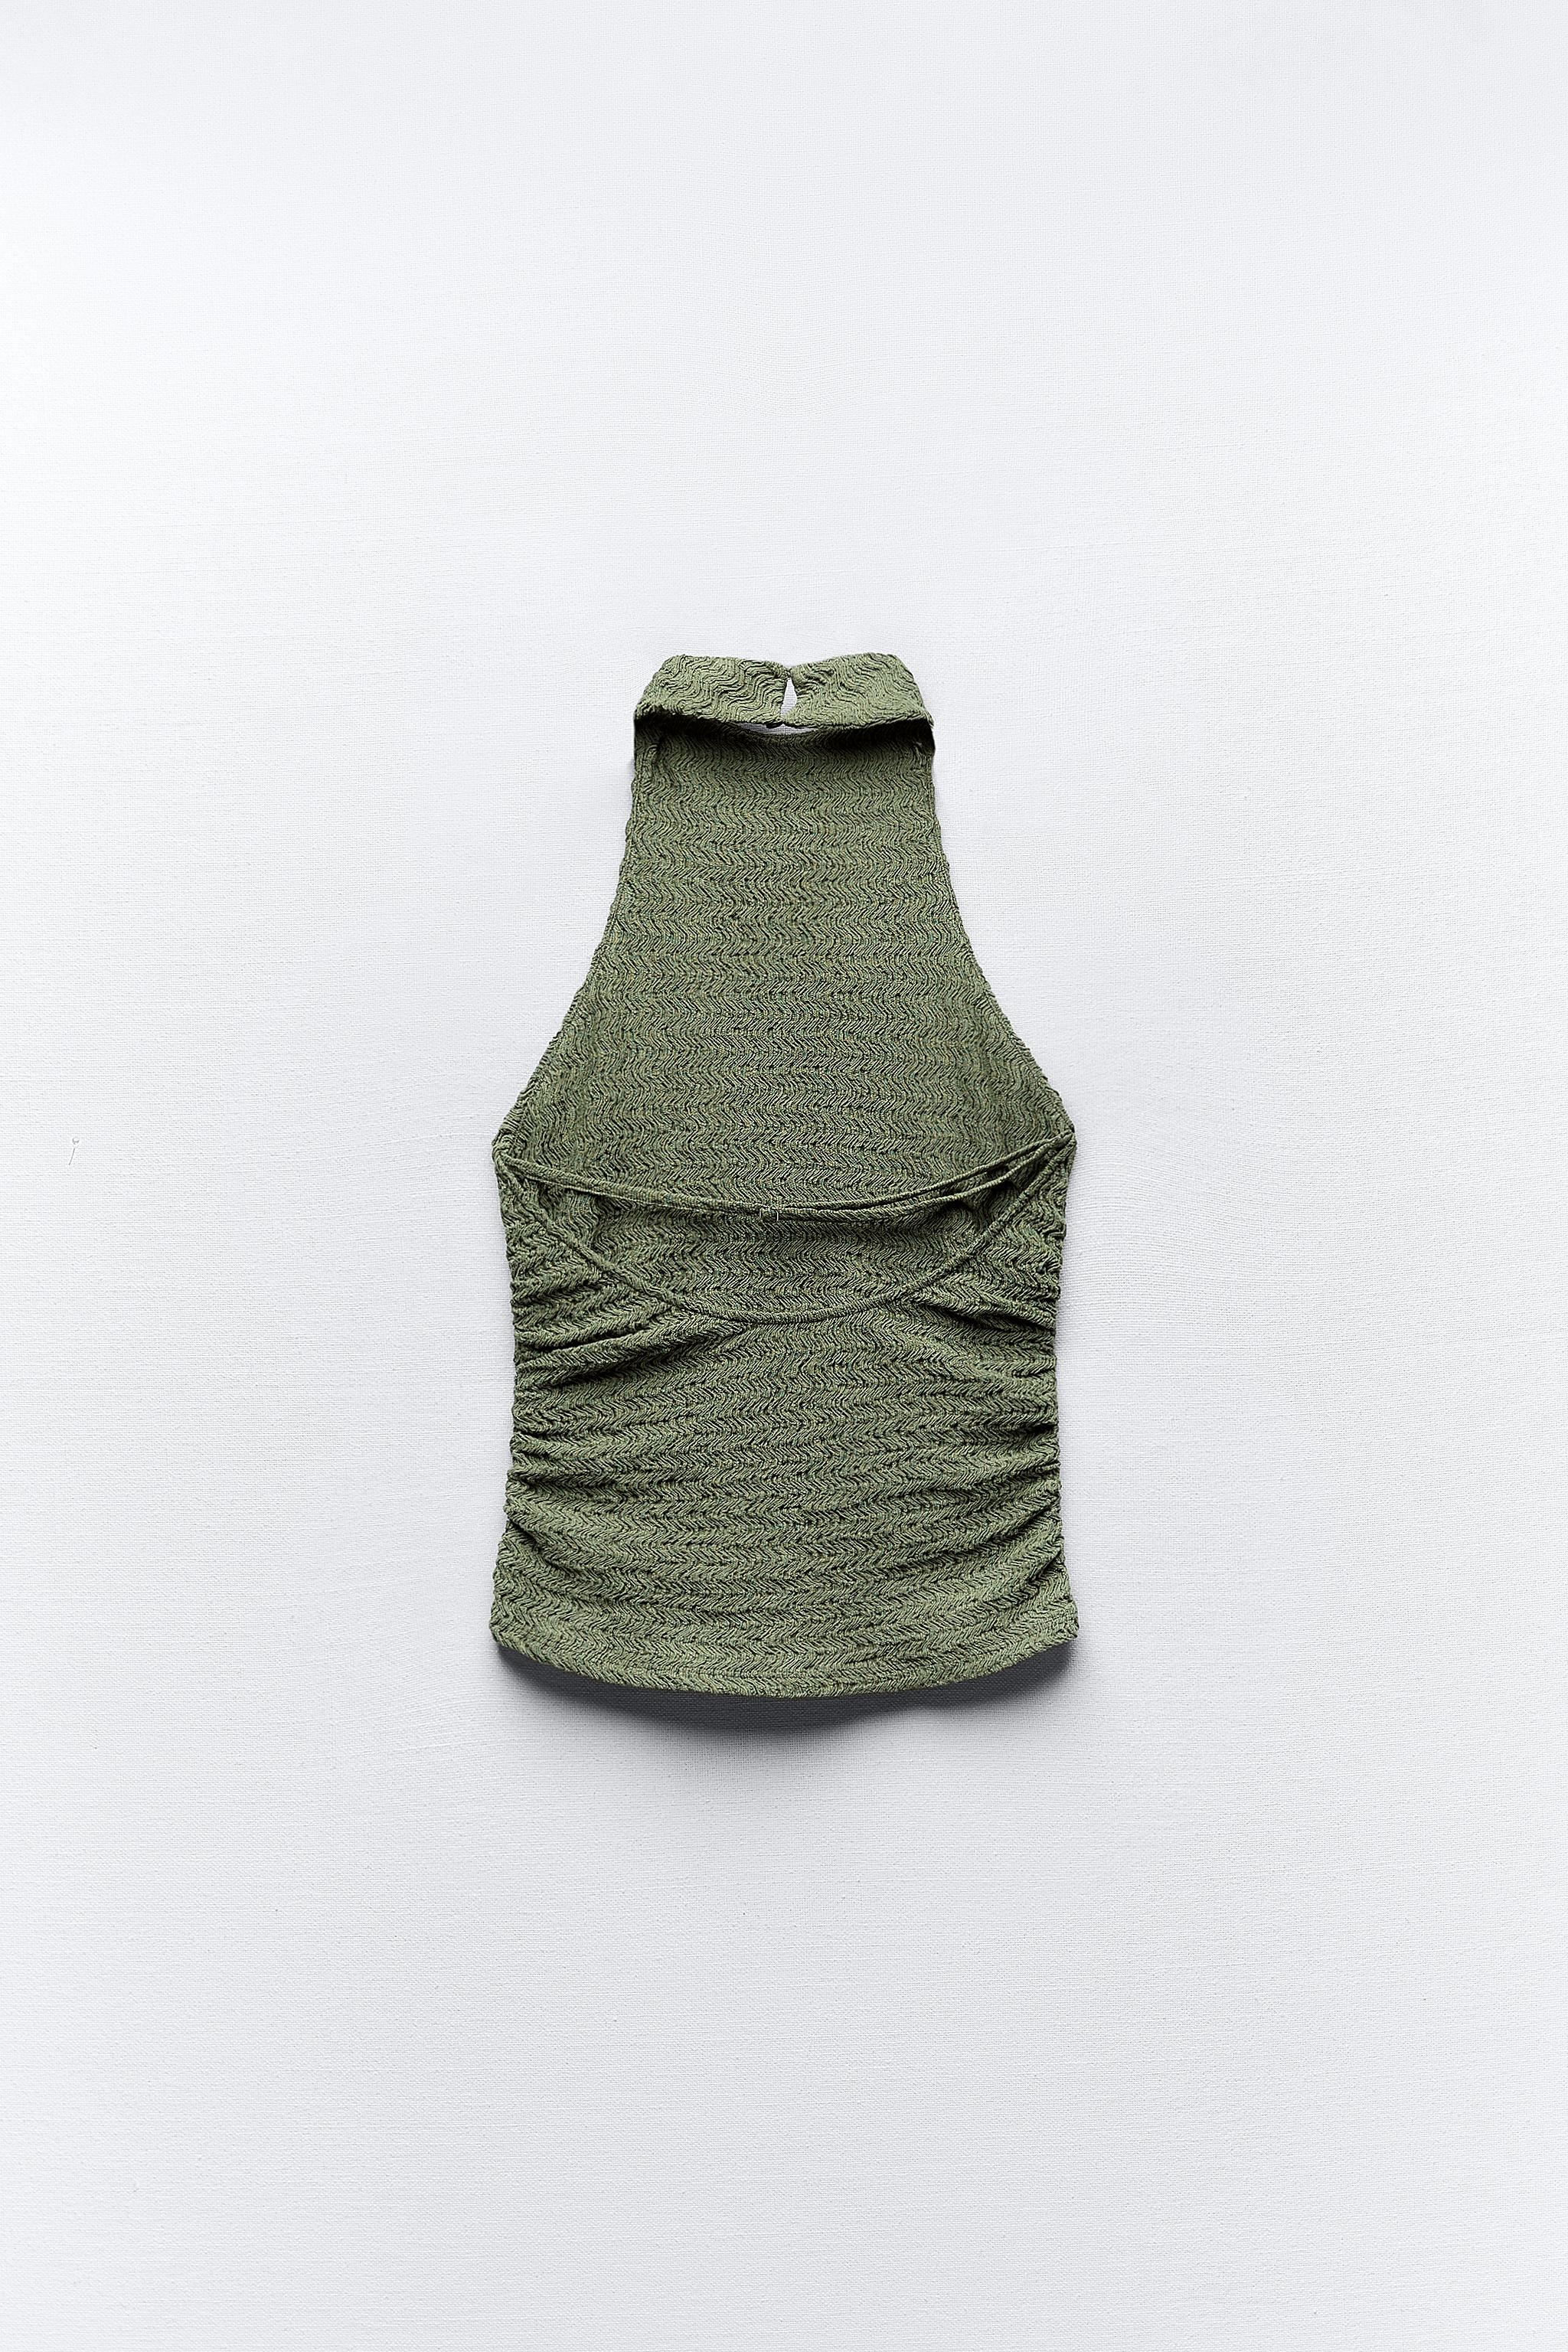 ZARA Halter Top Green - $18 (10% Off Retail) New With Tags - From Abbey